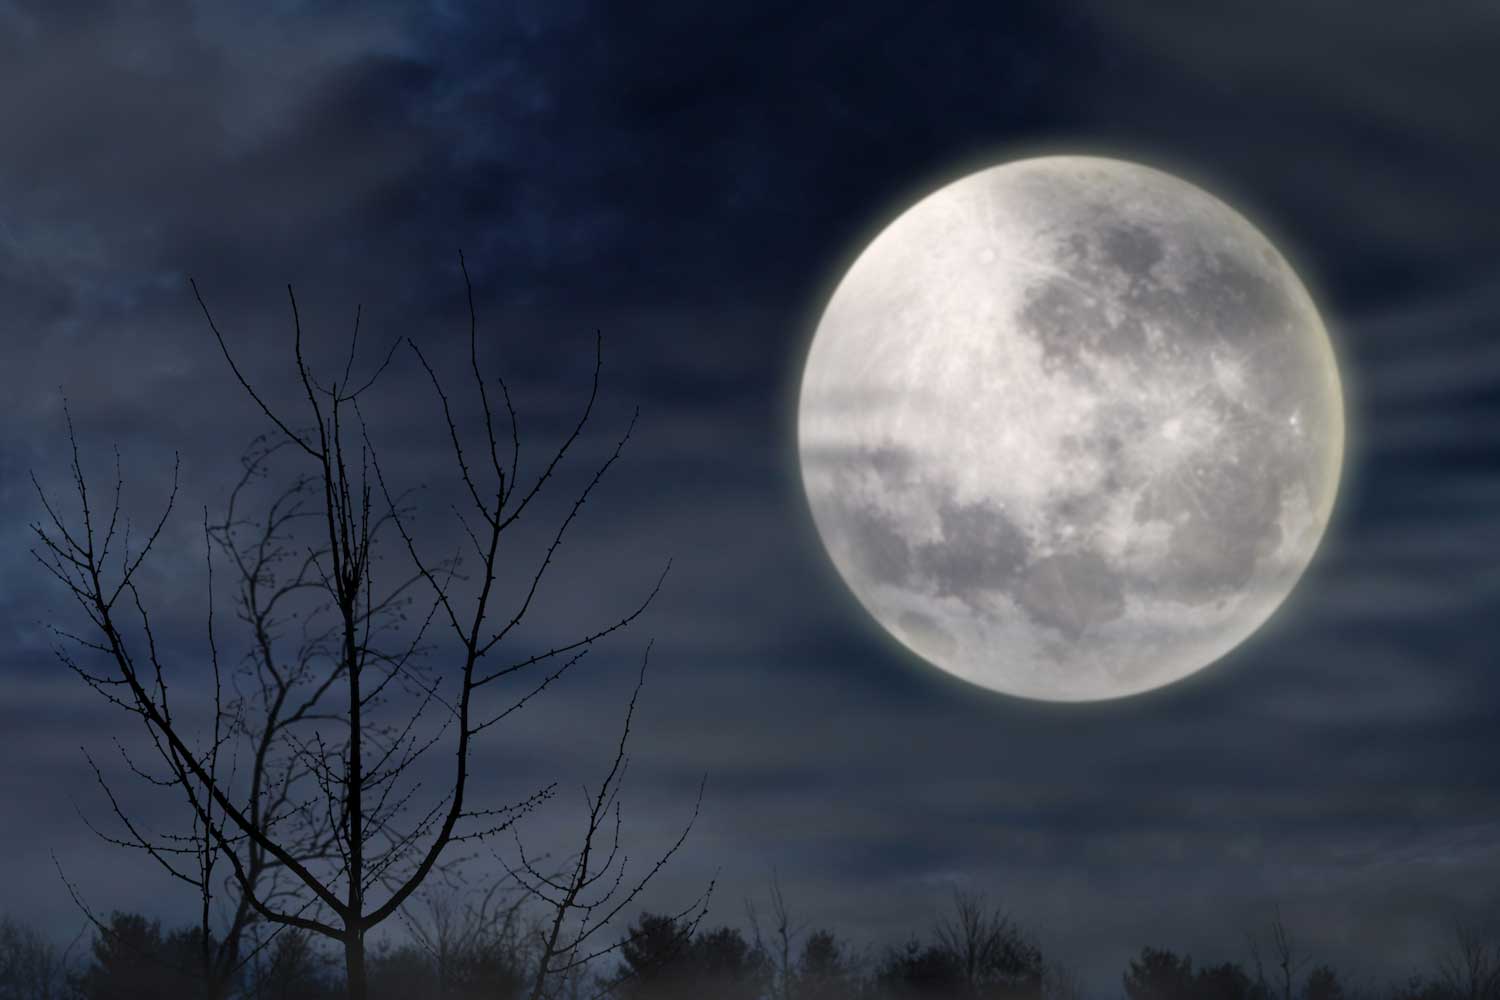 A full moon lighting up the night sky with a bare tree in the foreground